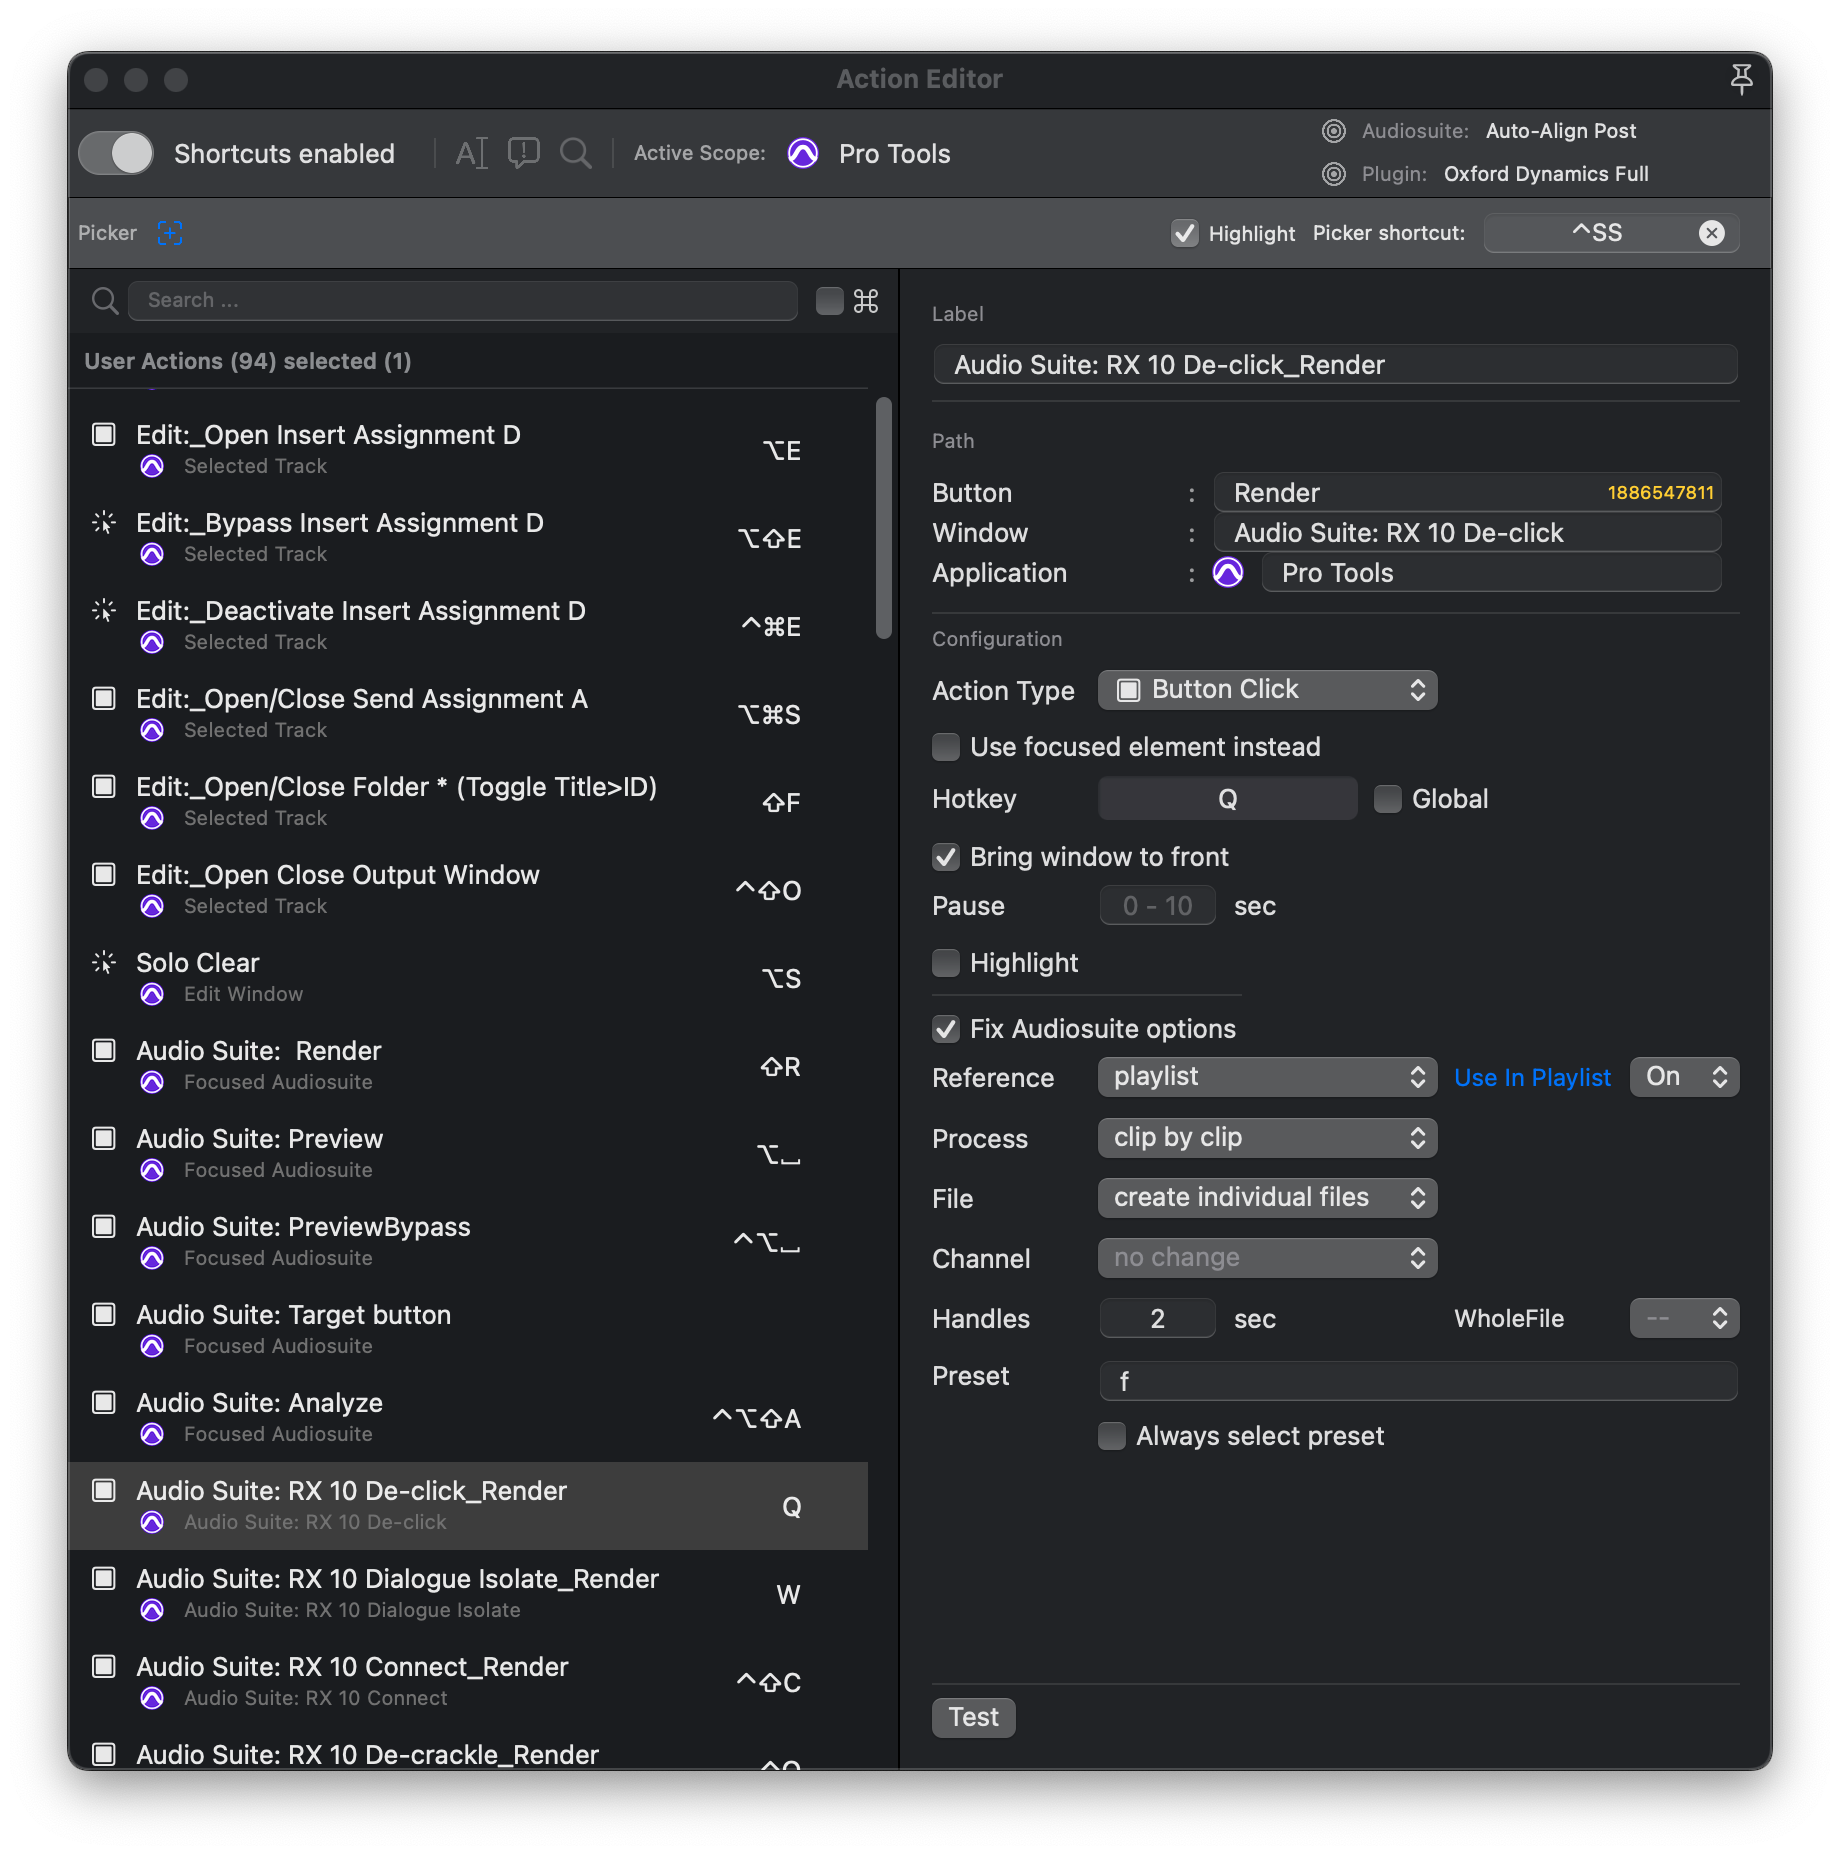 ActionEditor Example:
This is the list and detail view of User Interface action assignable to
Keyboard hotkeys for Pro Tools
